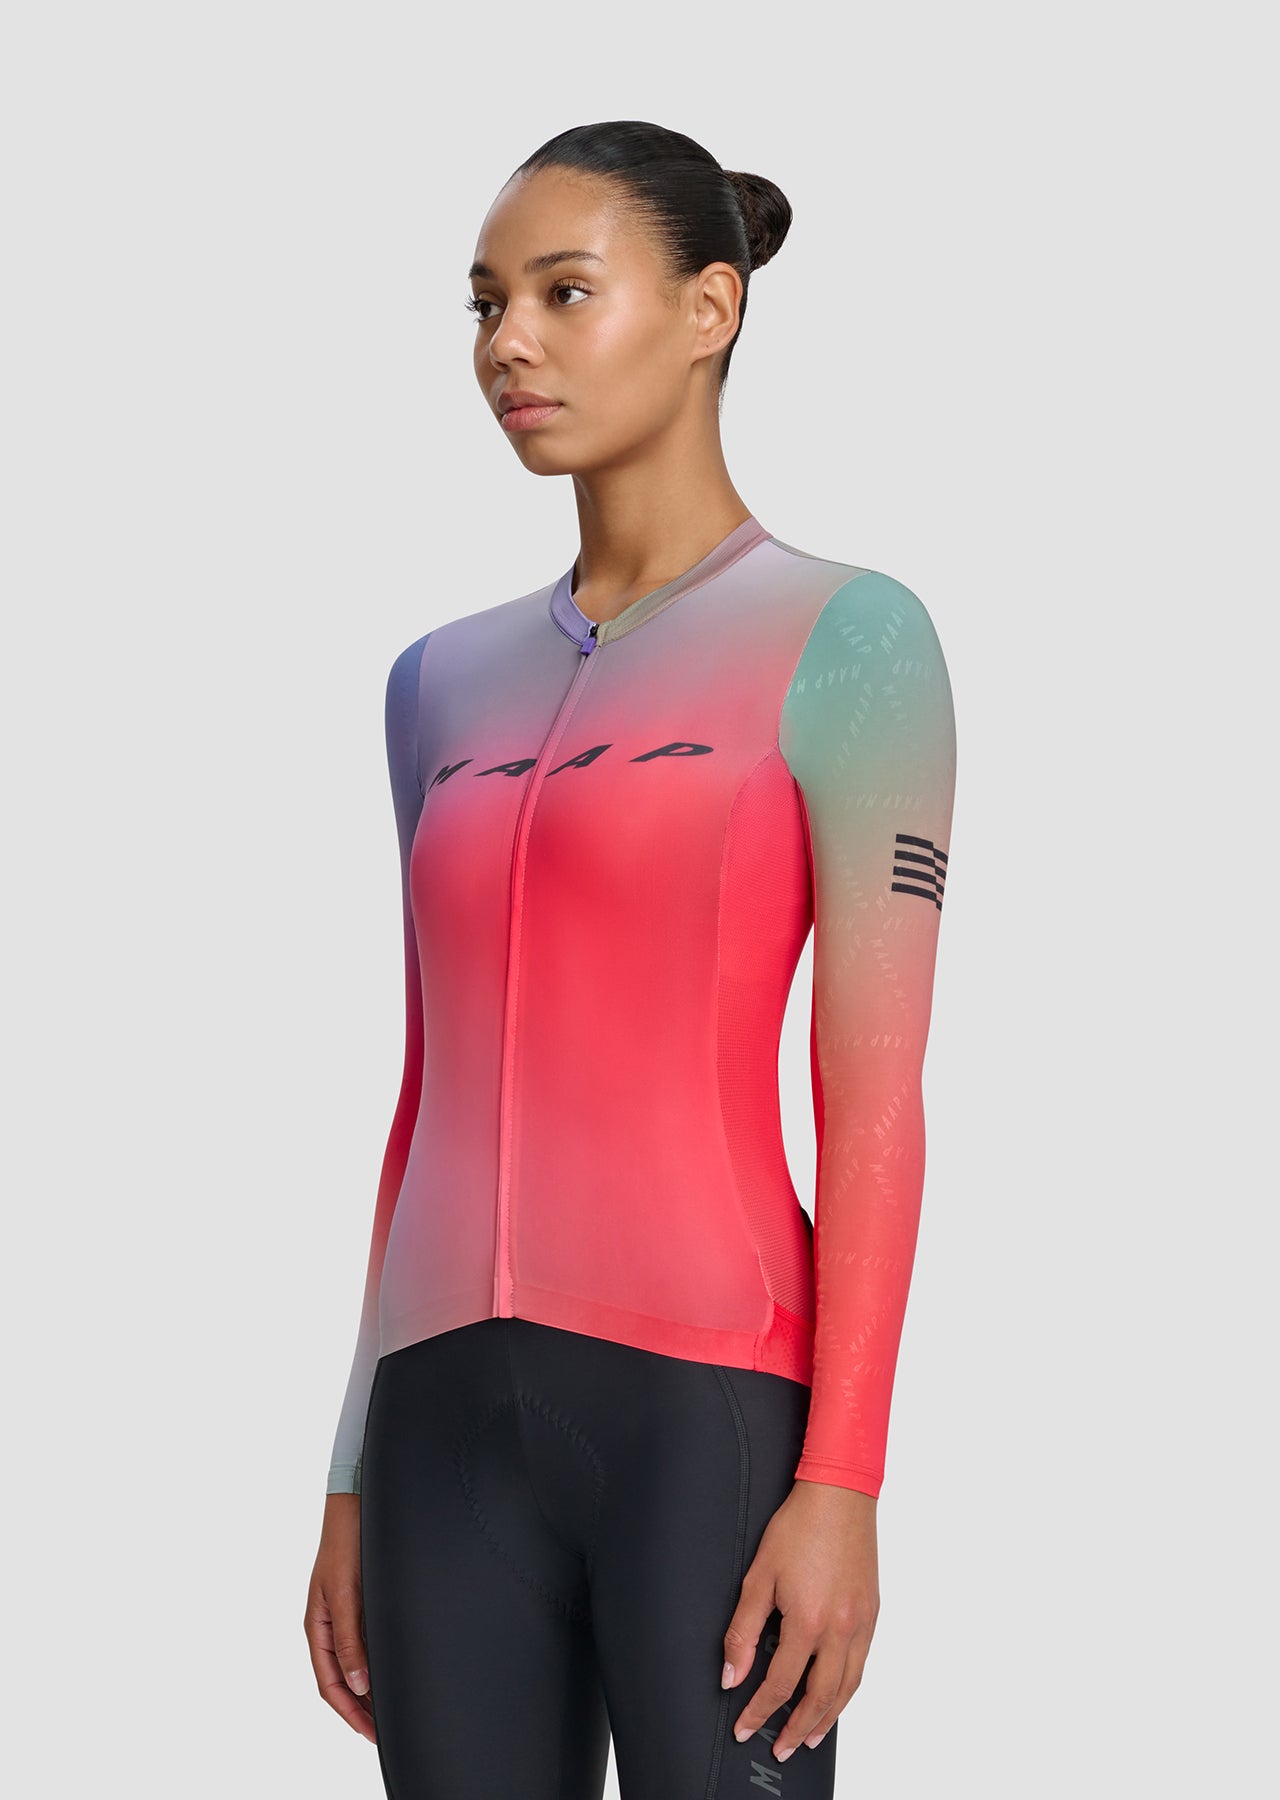 Women's Blurred Out Pro Hex LS Jersey 2.0